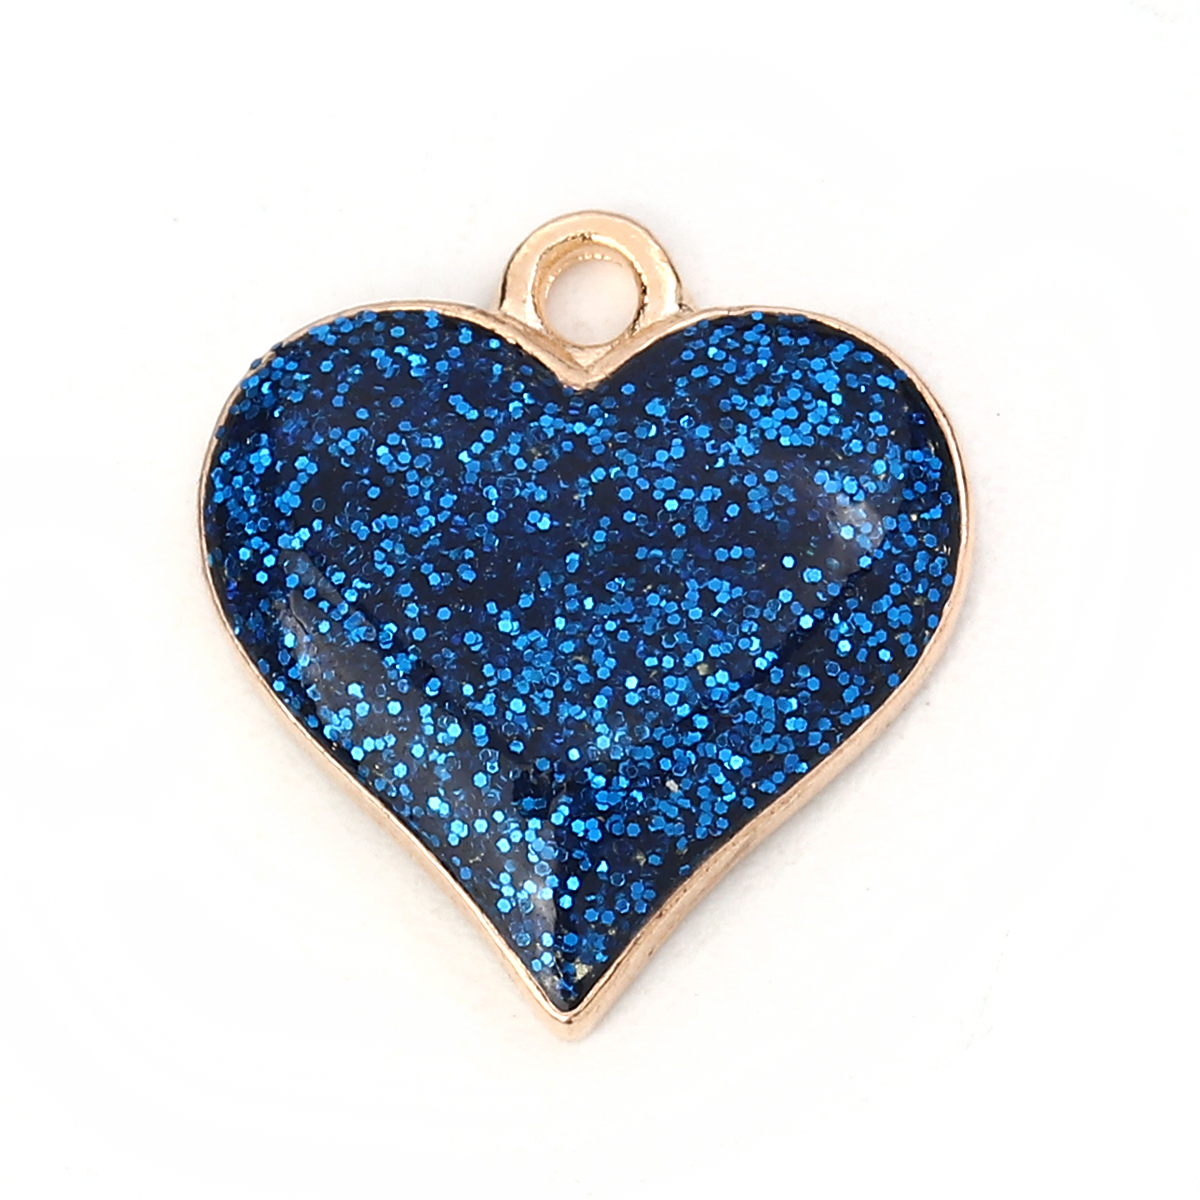 Picture of Zinc Based Alloy Charms Heart Gold Plated Royal Blue Glitter 17mm( 5/8") x 16mm( 5/8"), 10 PCs